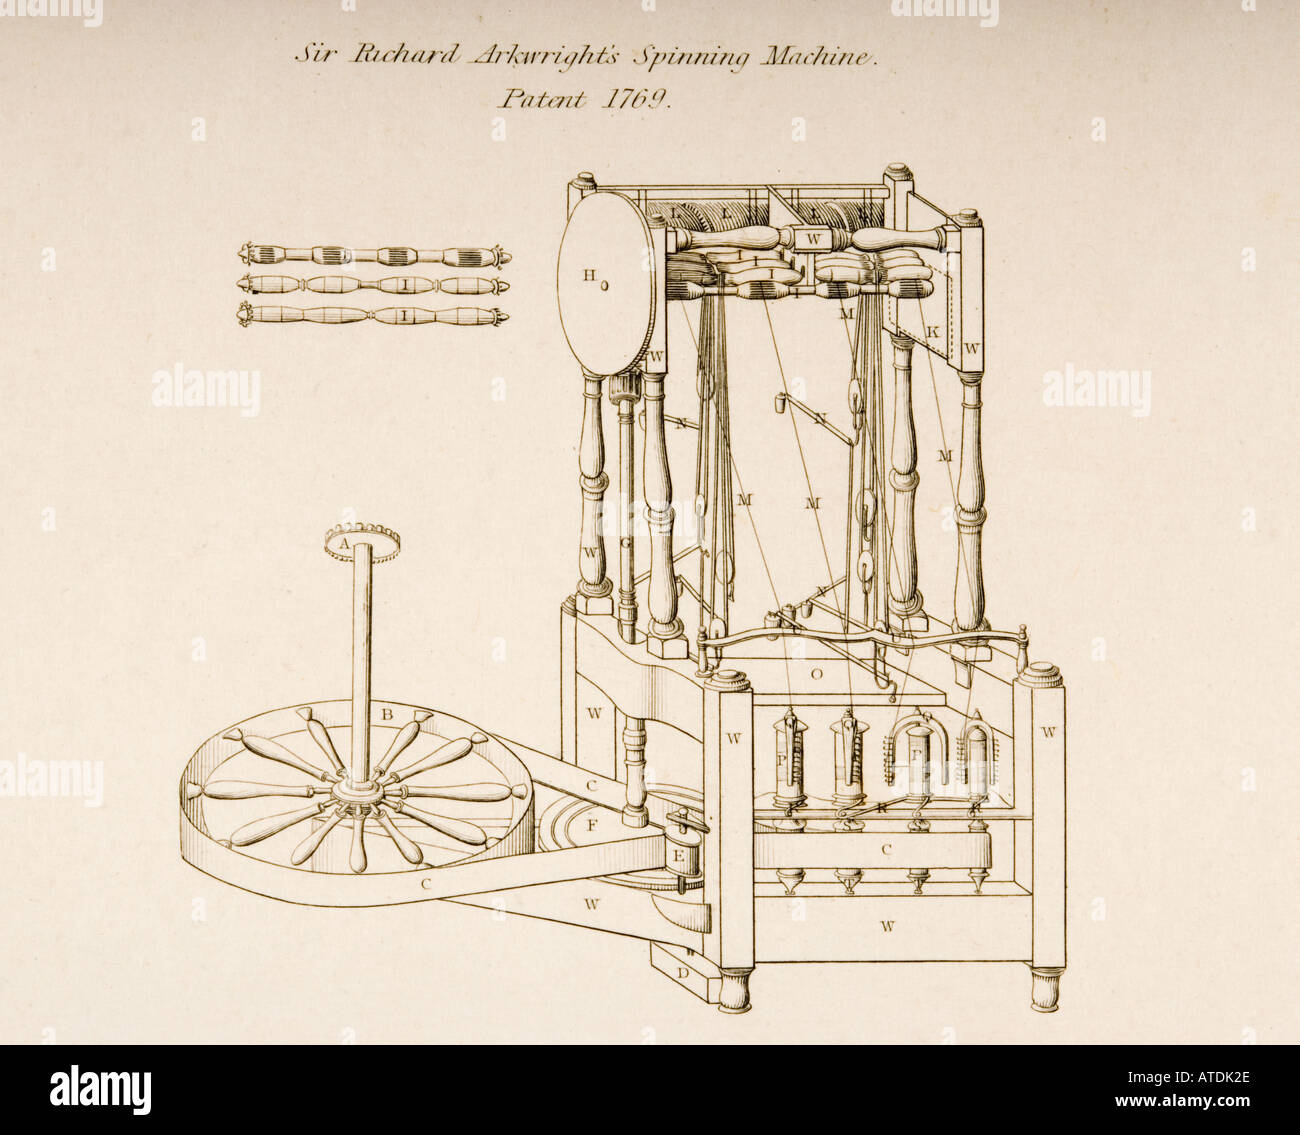 Drawing of Sir Richard Arkwright's Spinning Machine, patented 1769. Stock Photo